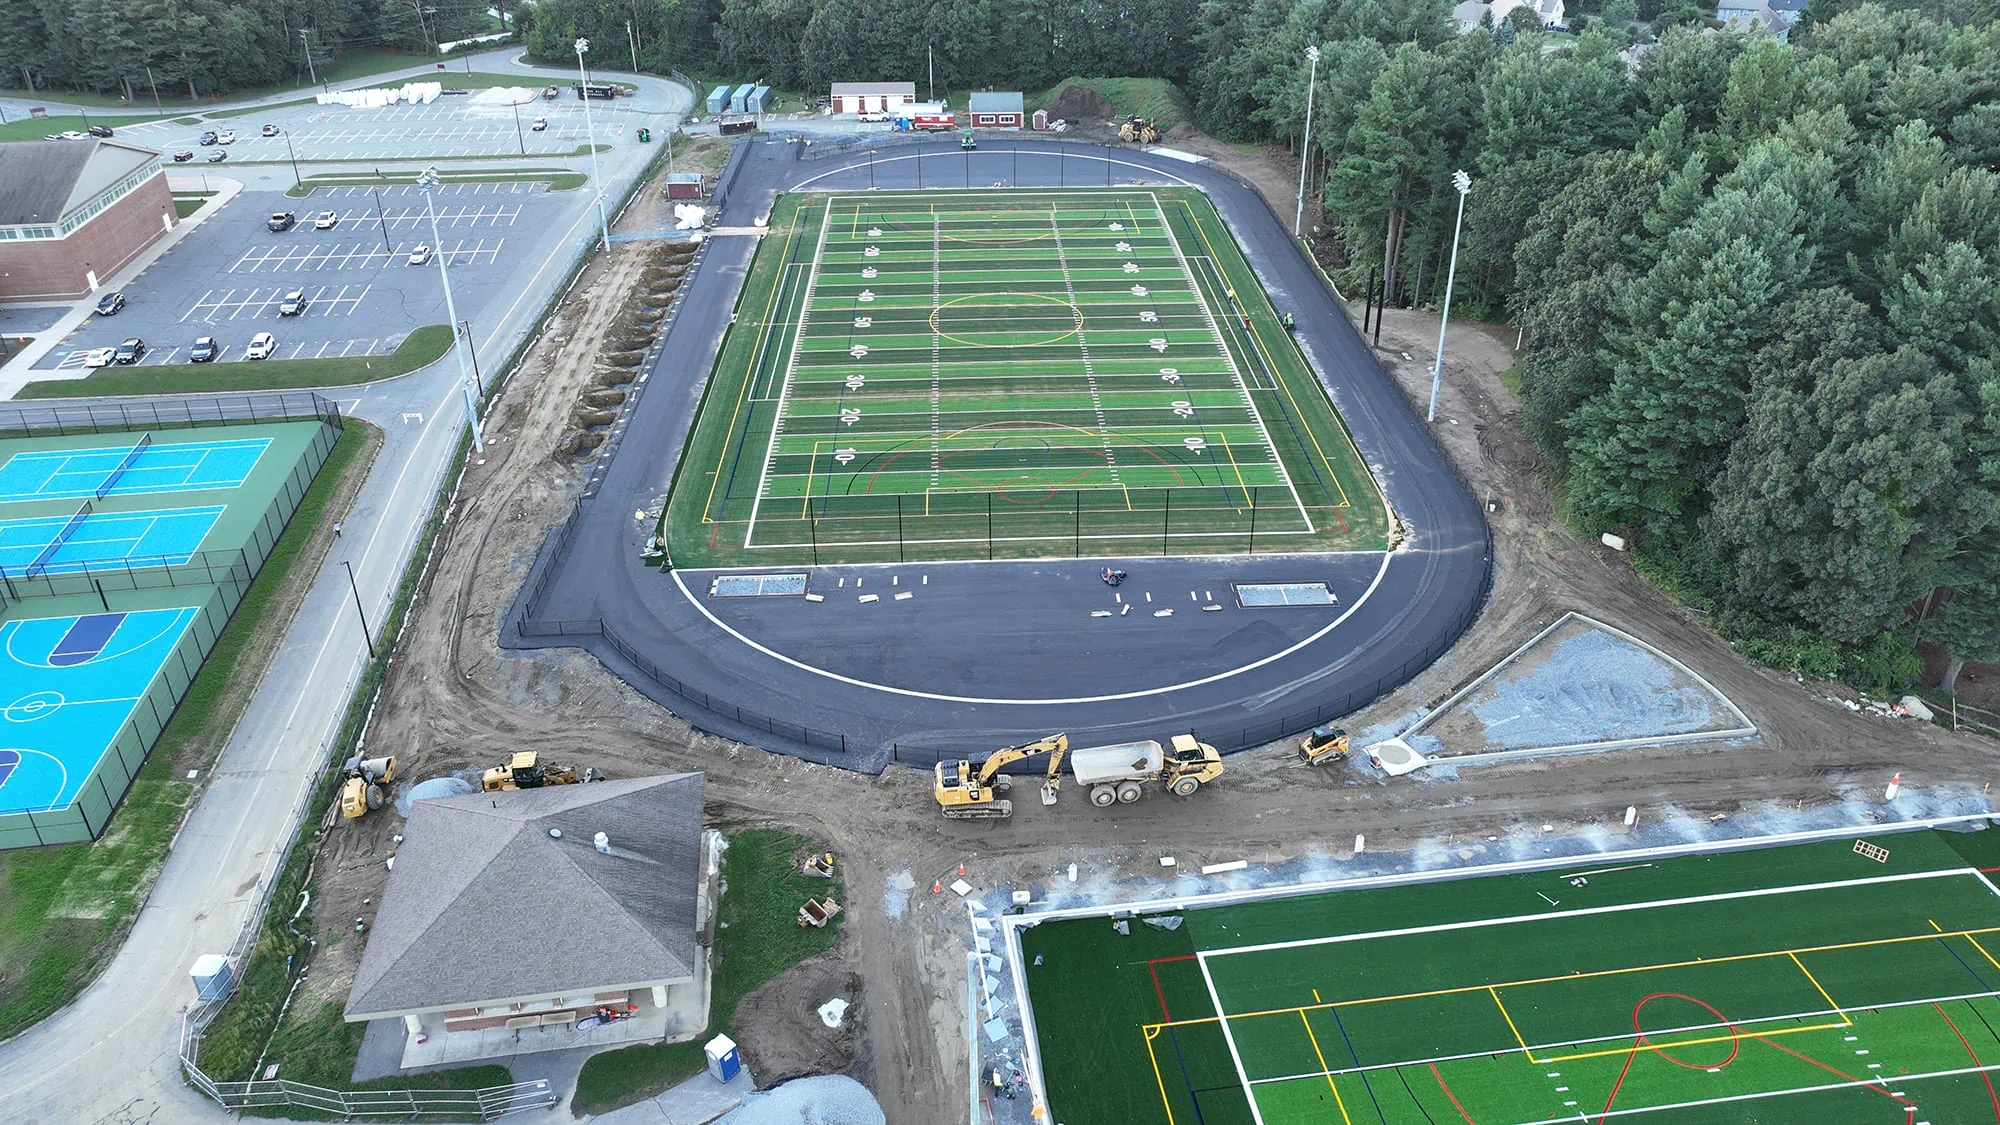 Work continues on ‘Gonkplex’ at ARHS